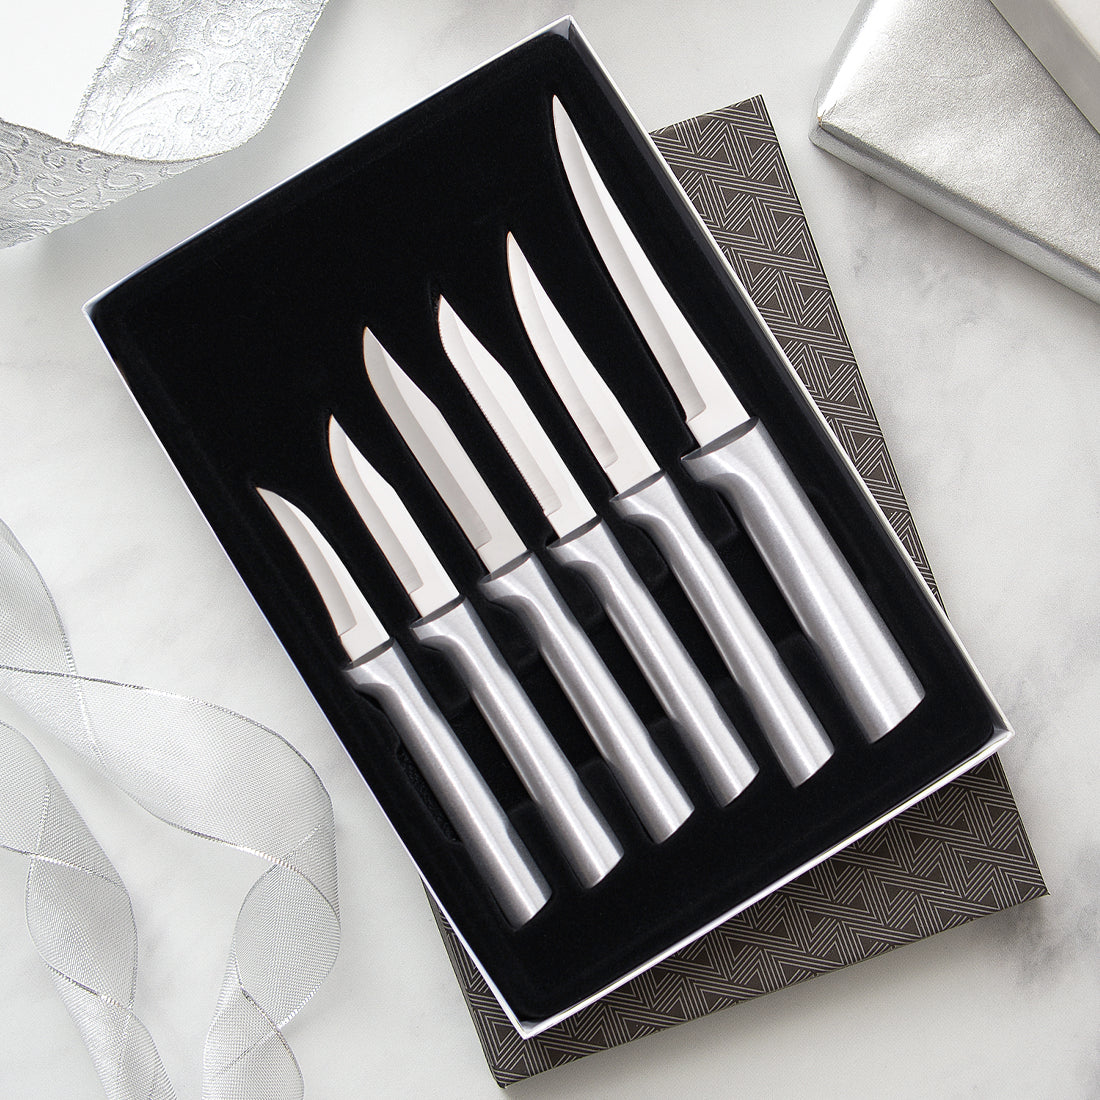 Rada Cutlery Paring Knives Gift Set in a black lined gift set.